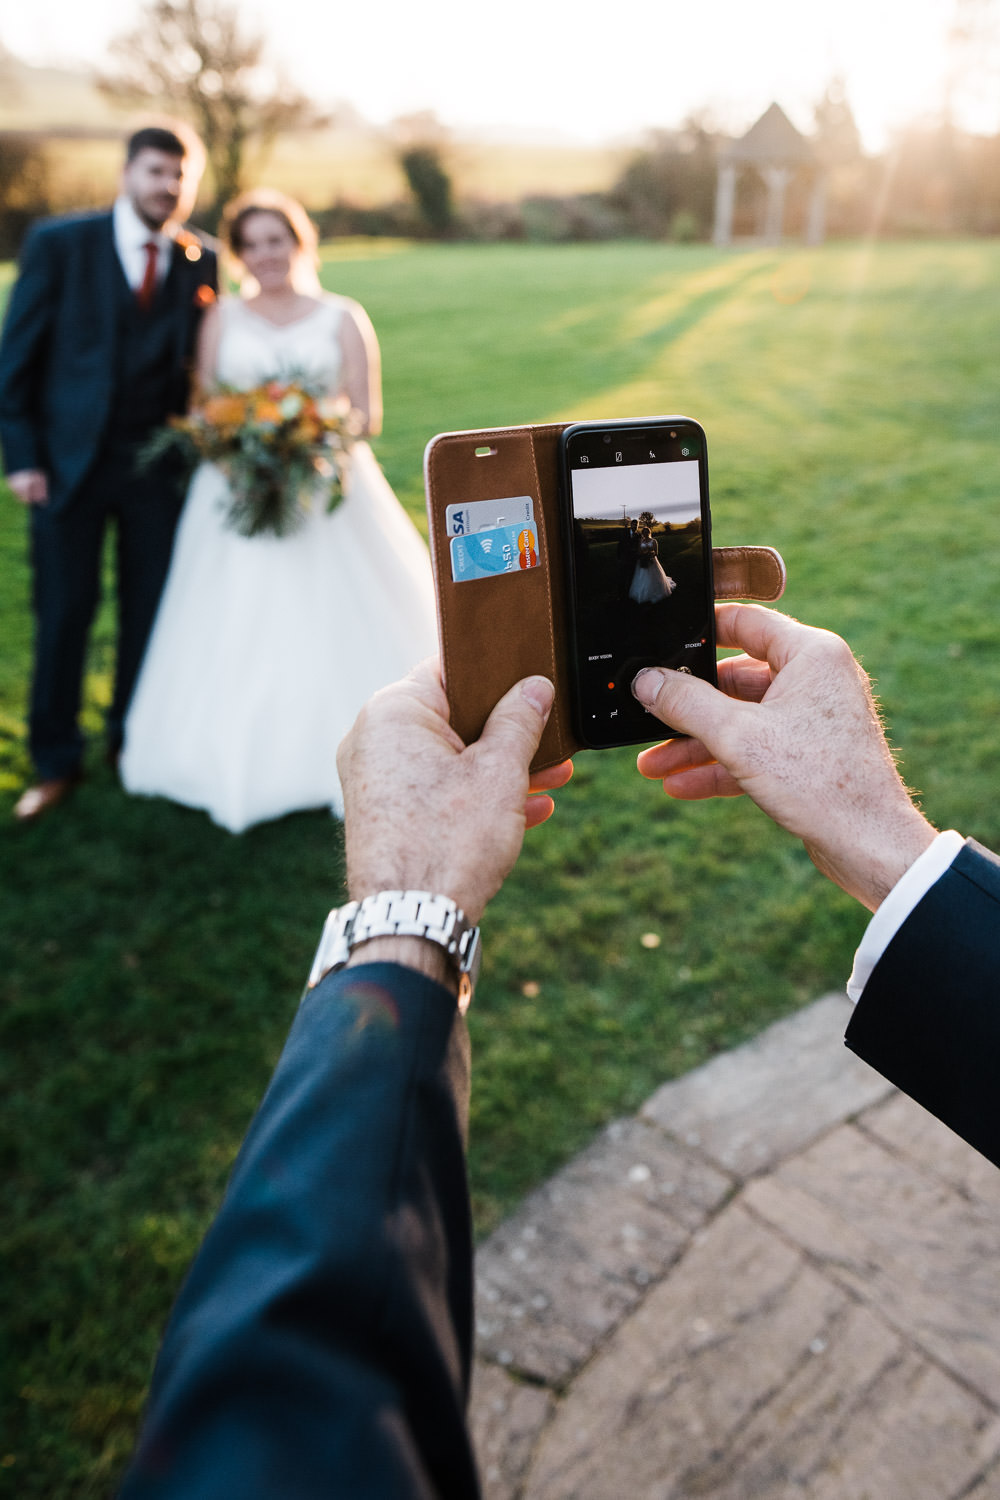 guest taking a photo at a wedding with iPhone